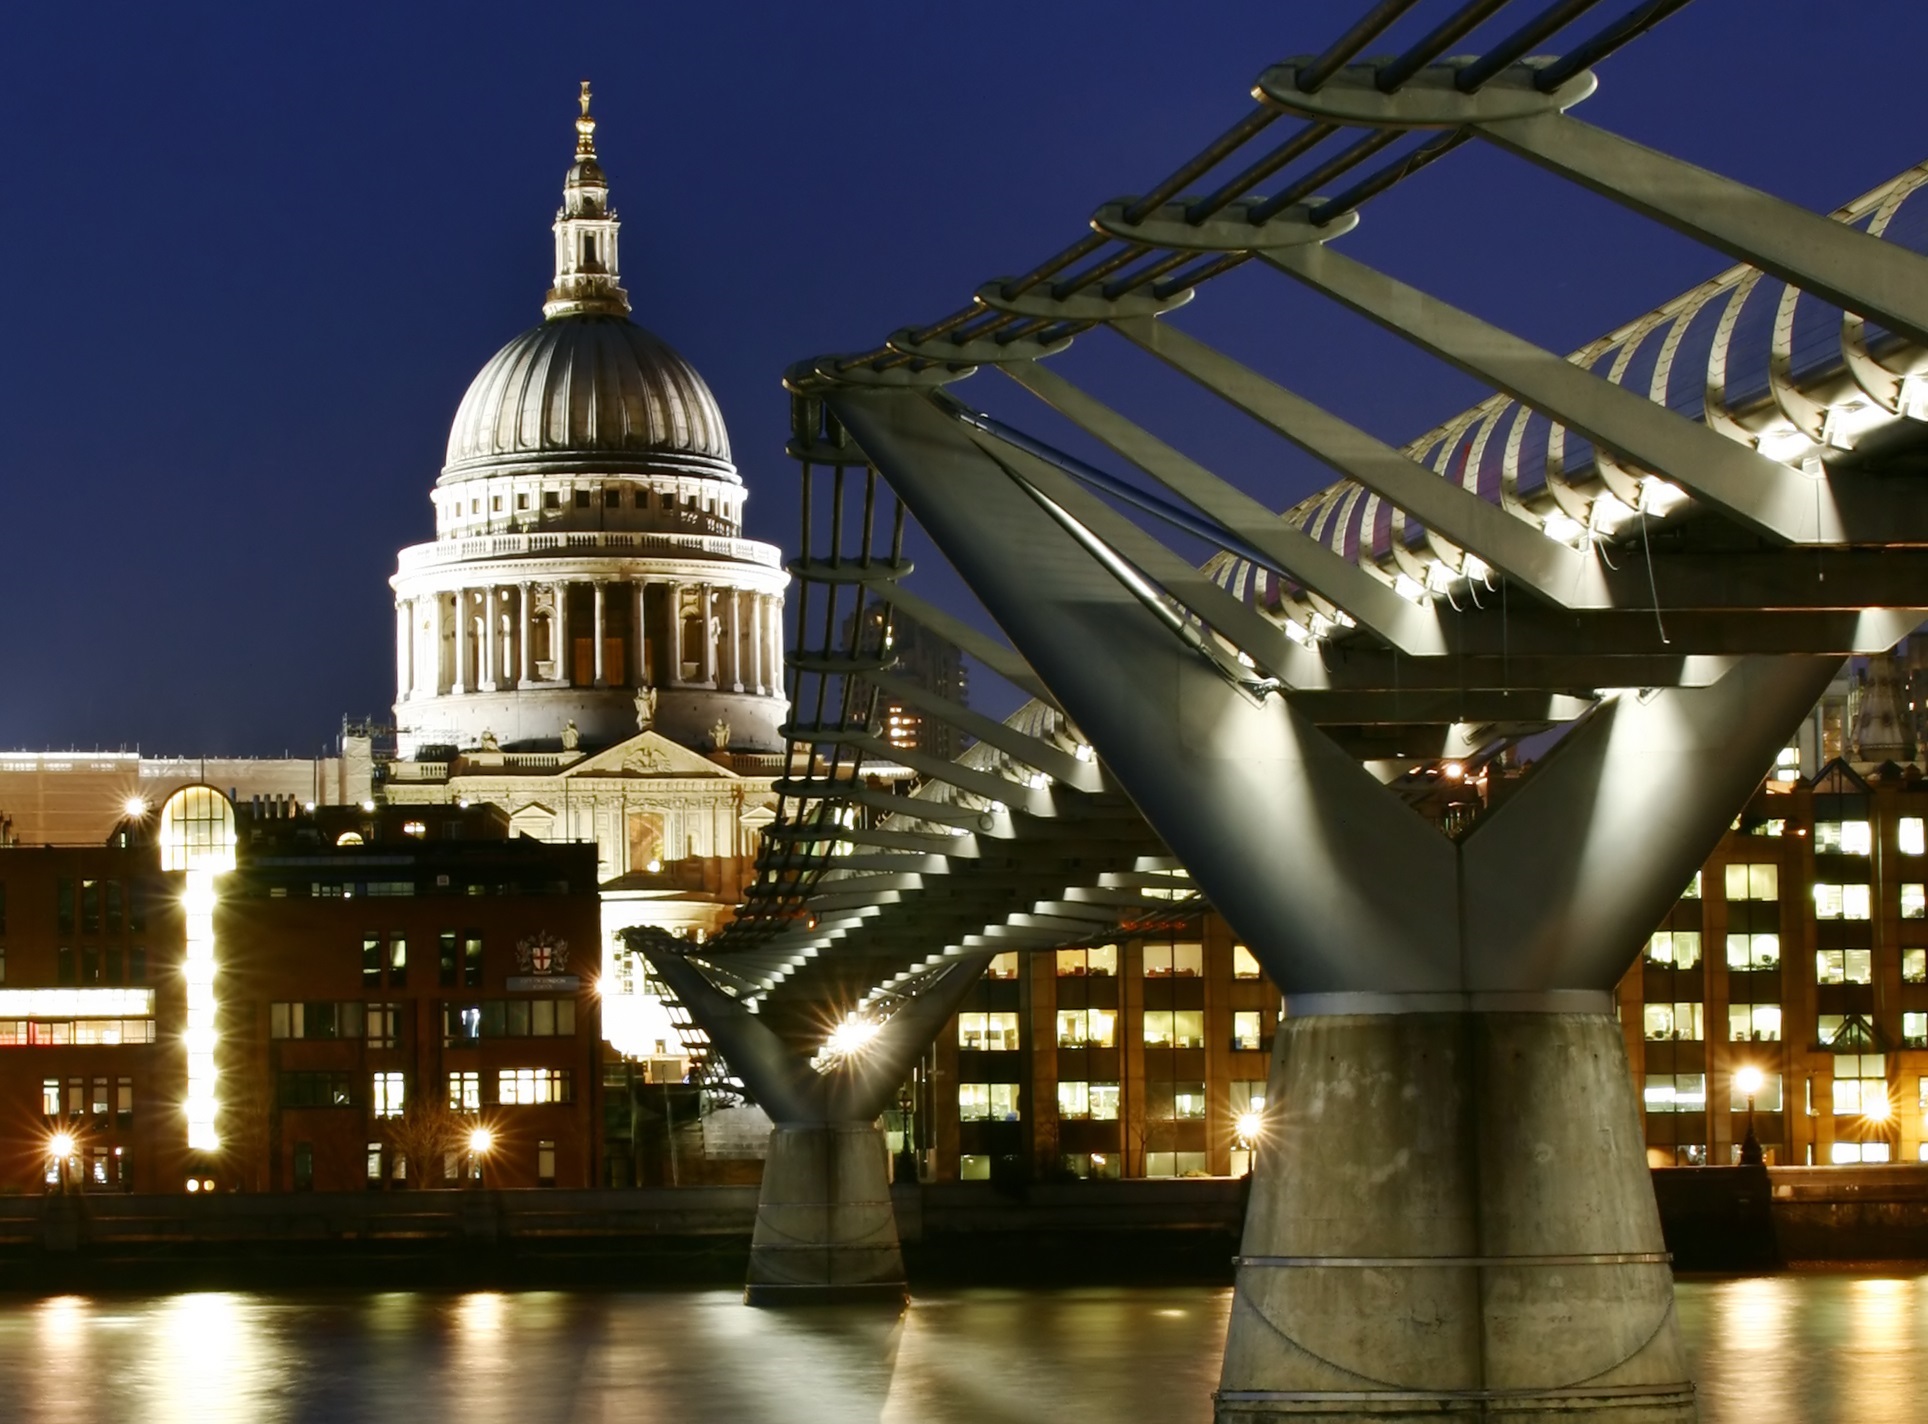 Image of the Millennium Bridge in London, UK and St Pauls Cathedral at night.